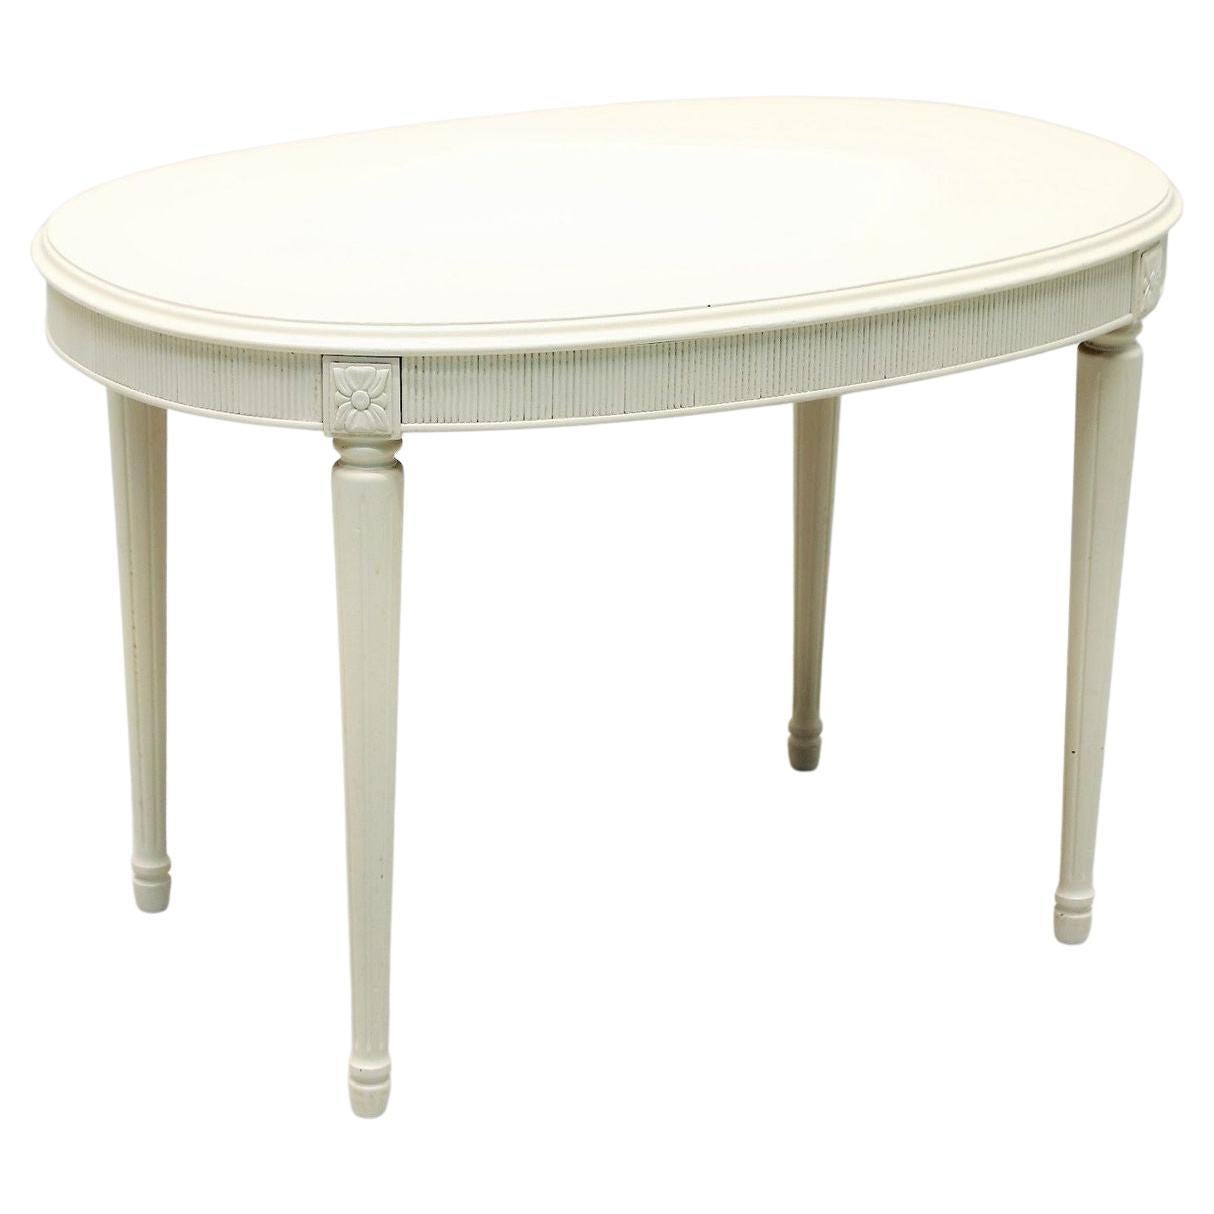 1900s White Painted Swedish Gustavian Style Salon Table For Sale